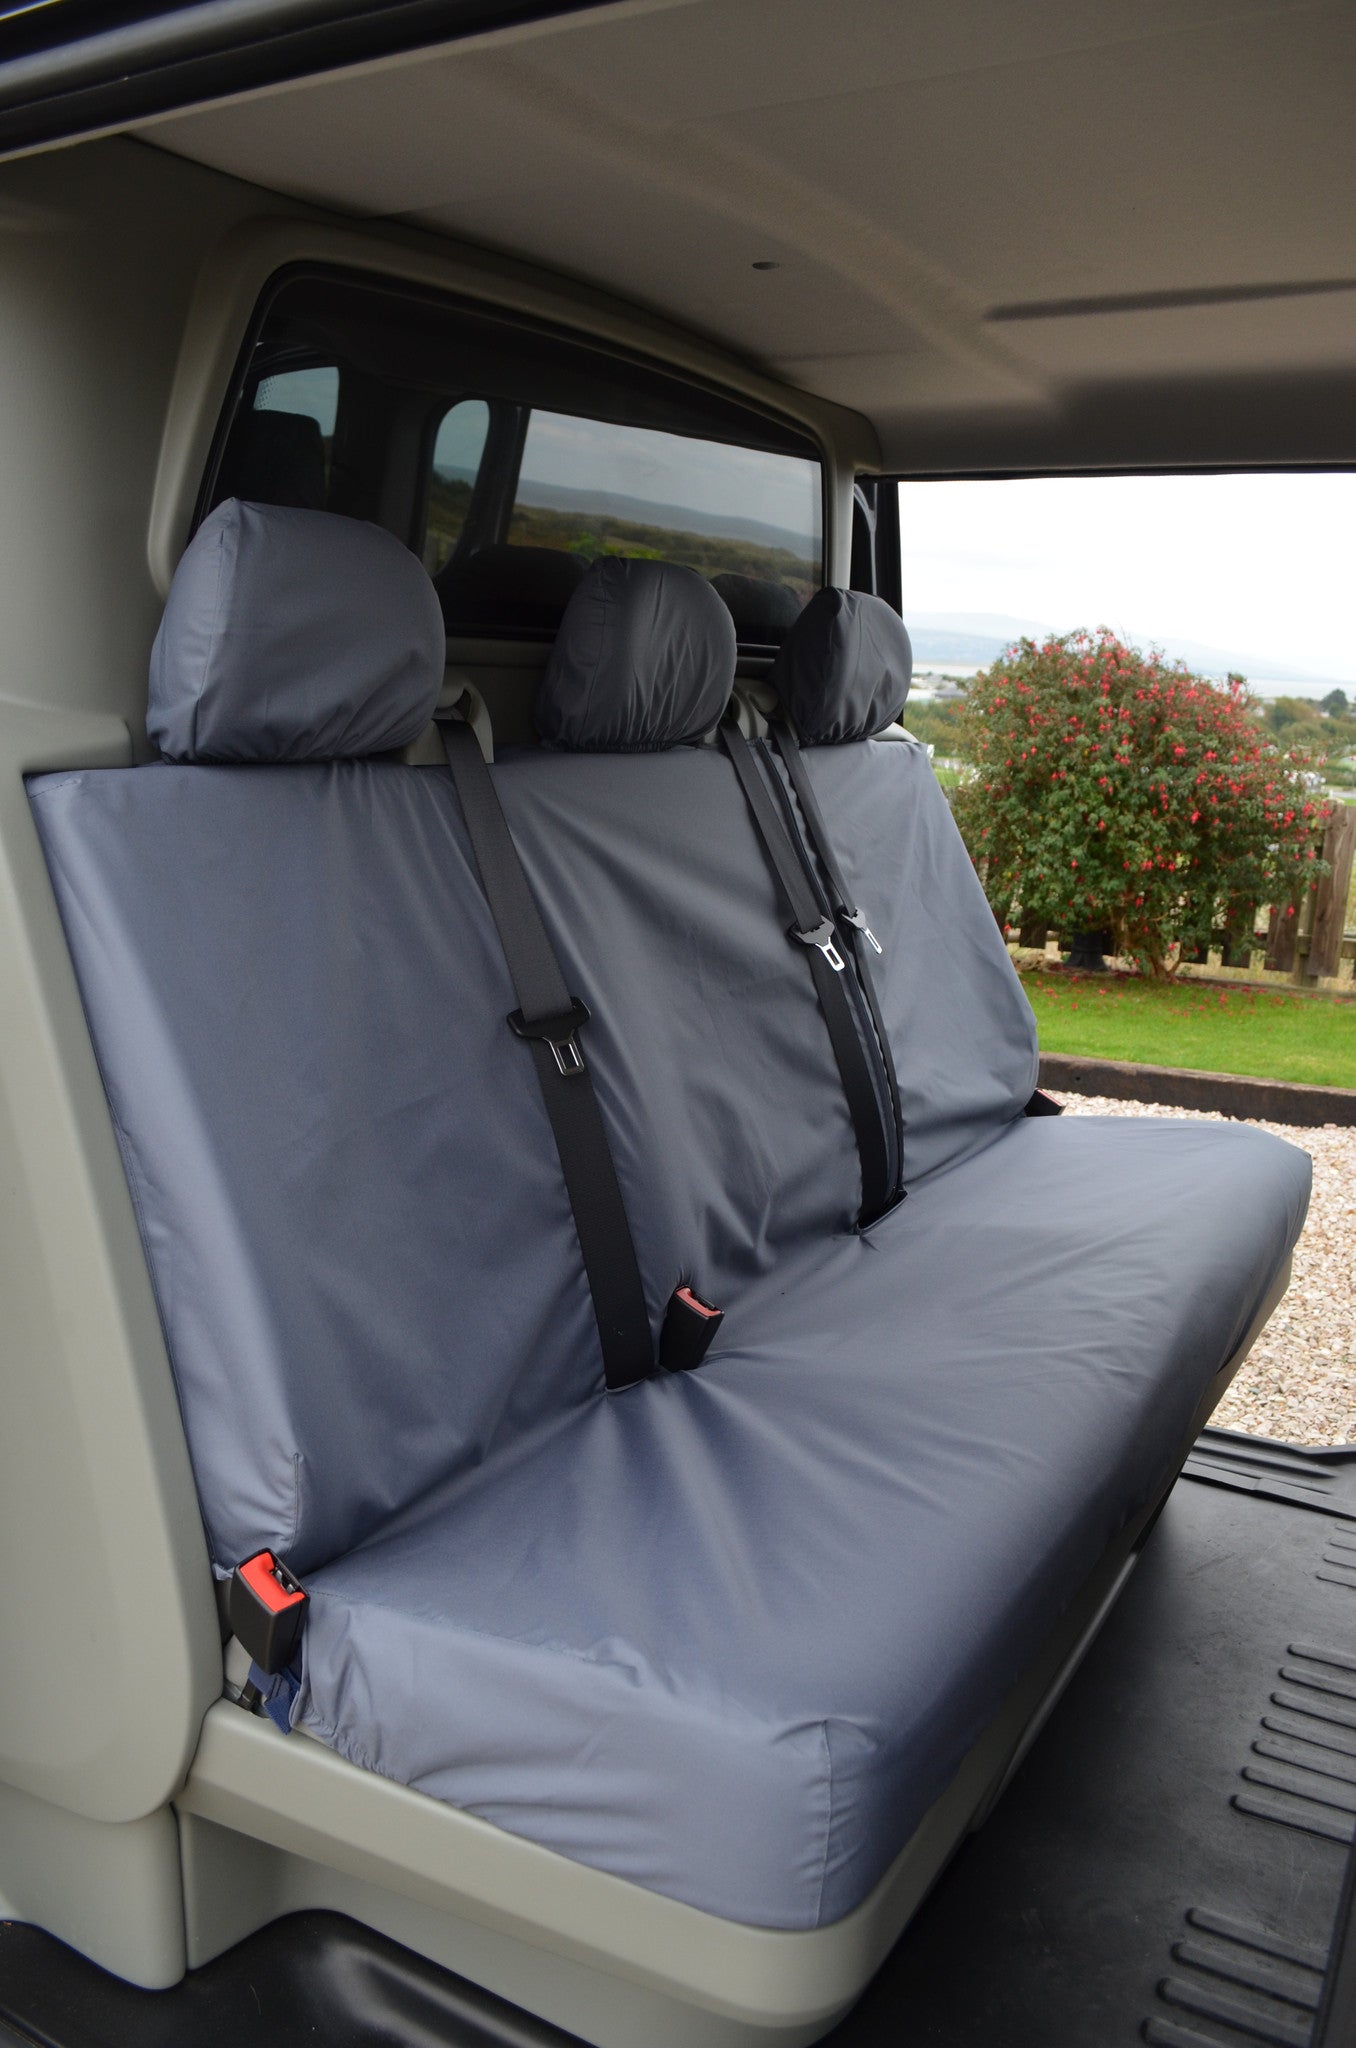 Renault Trafic Crew Cab 2006 - 2014 Rear Seat Covers Grey Turtle Covers Ltd